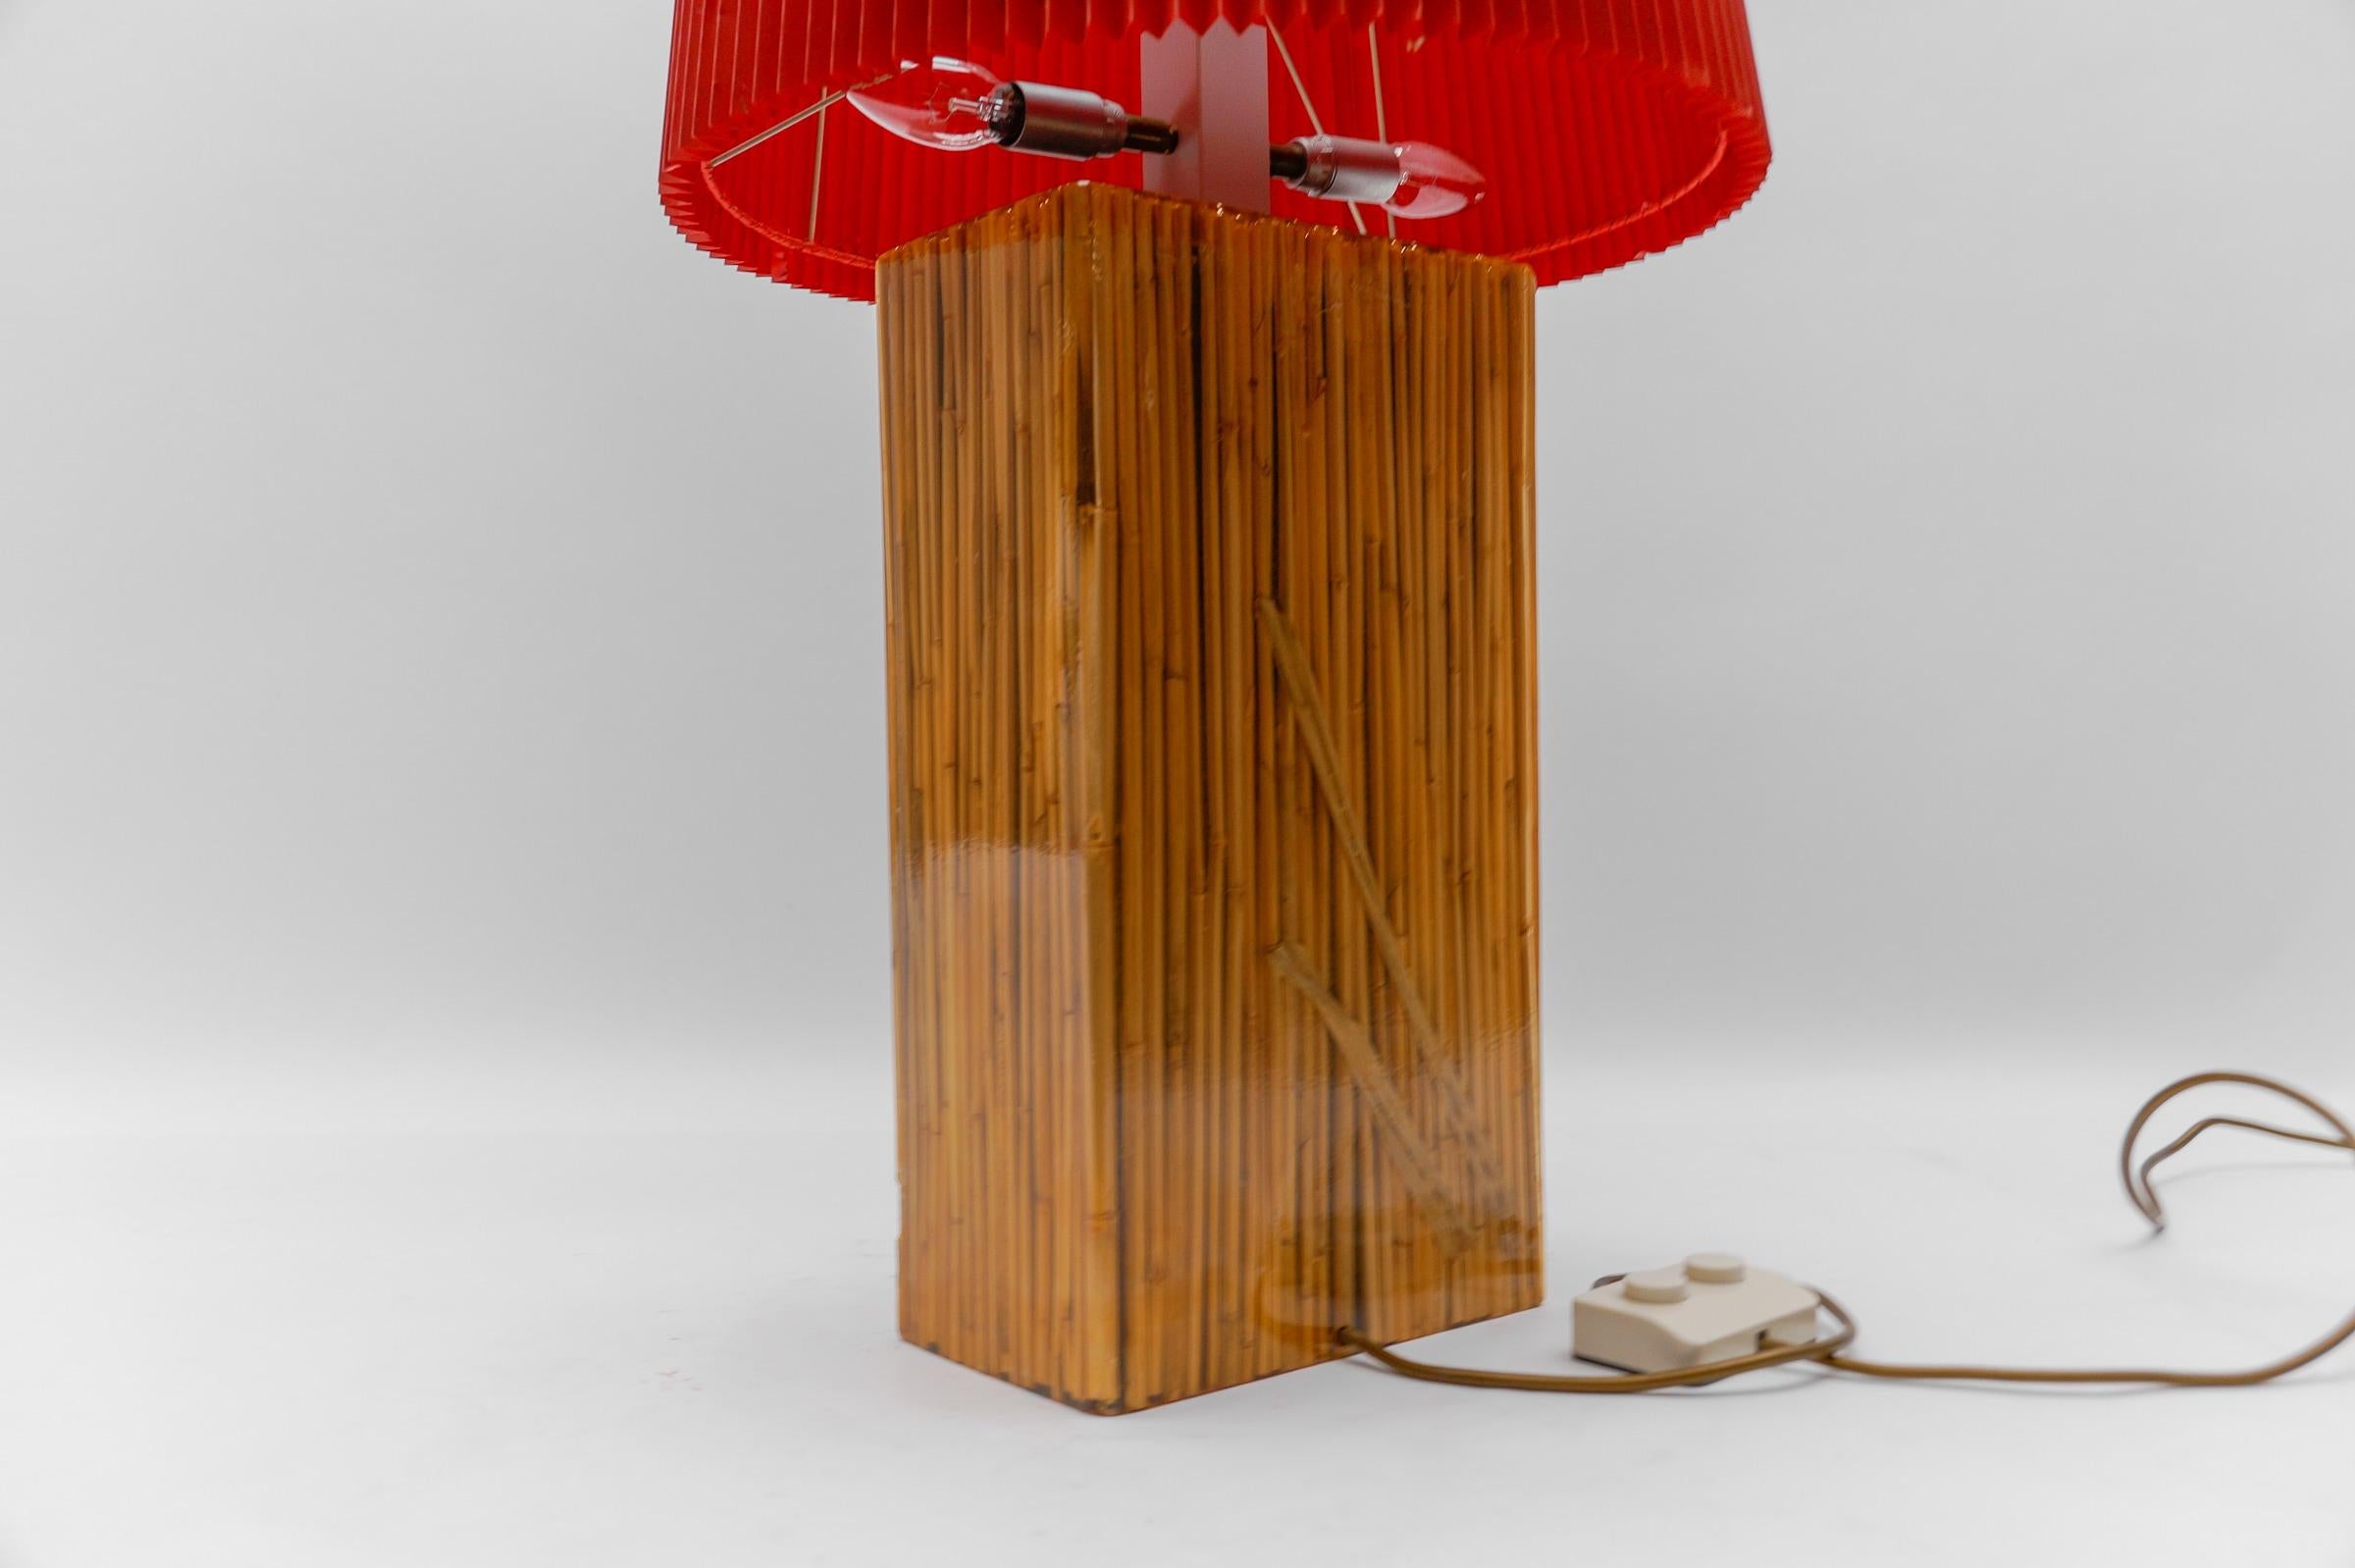 Large Riccardo Marzi Bamboo Resin Table Lamp, 1970s Italy For Sale 3